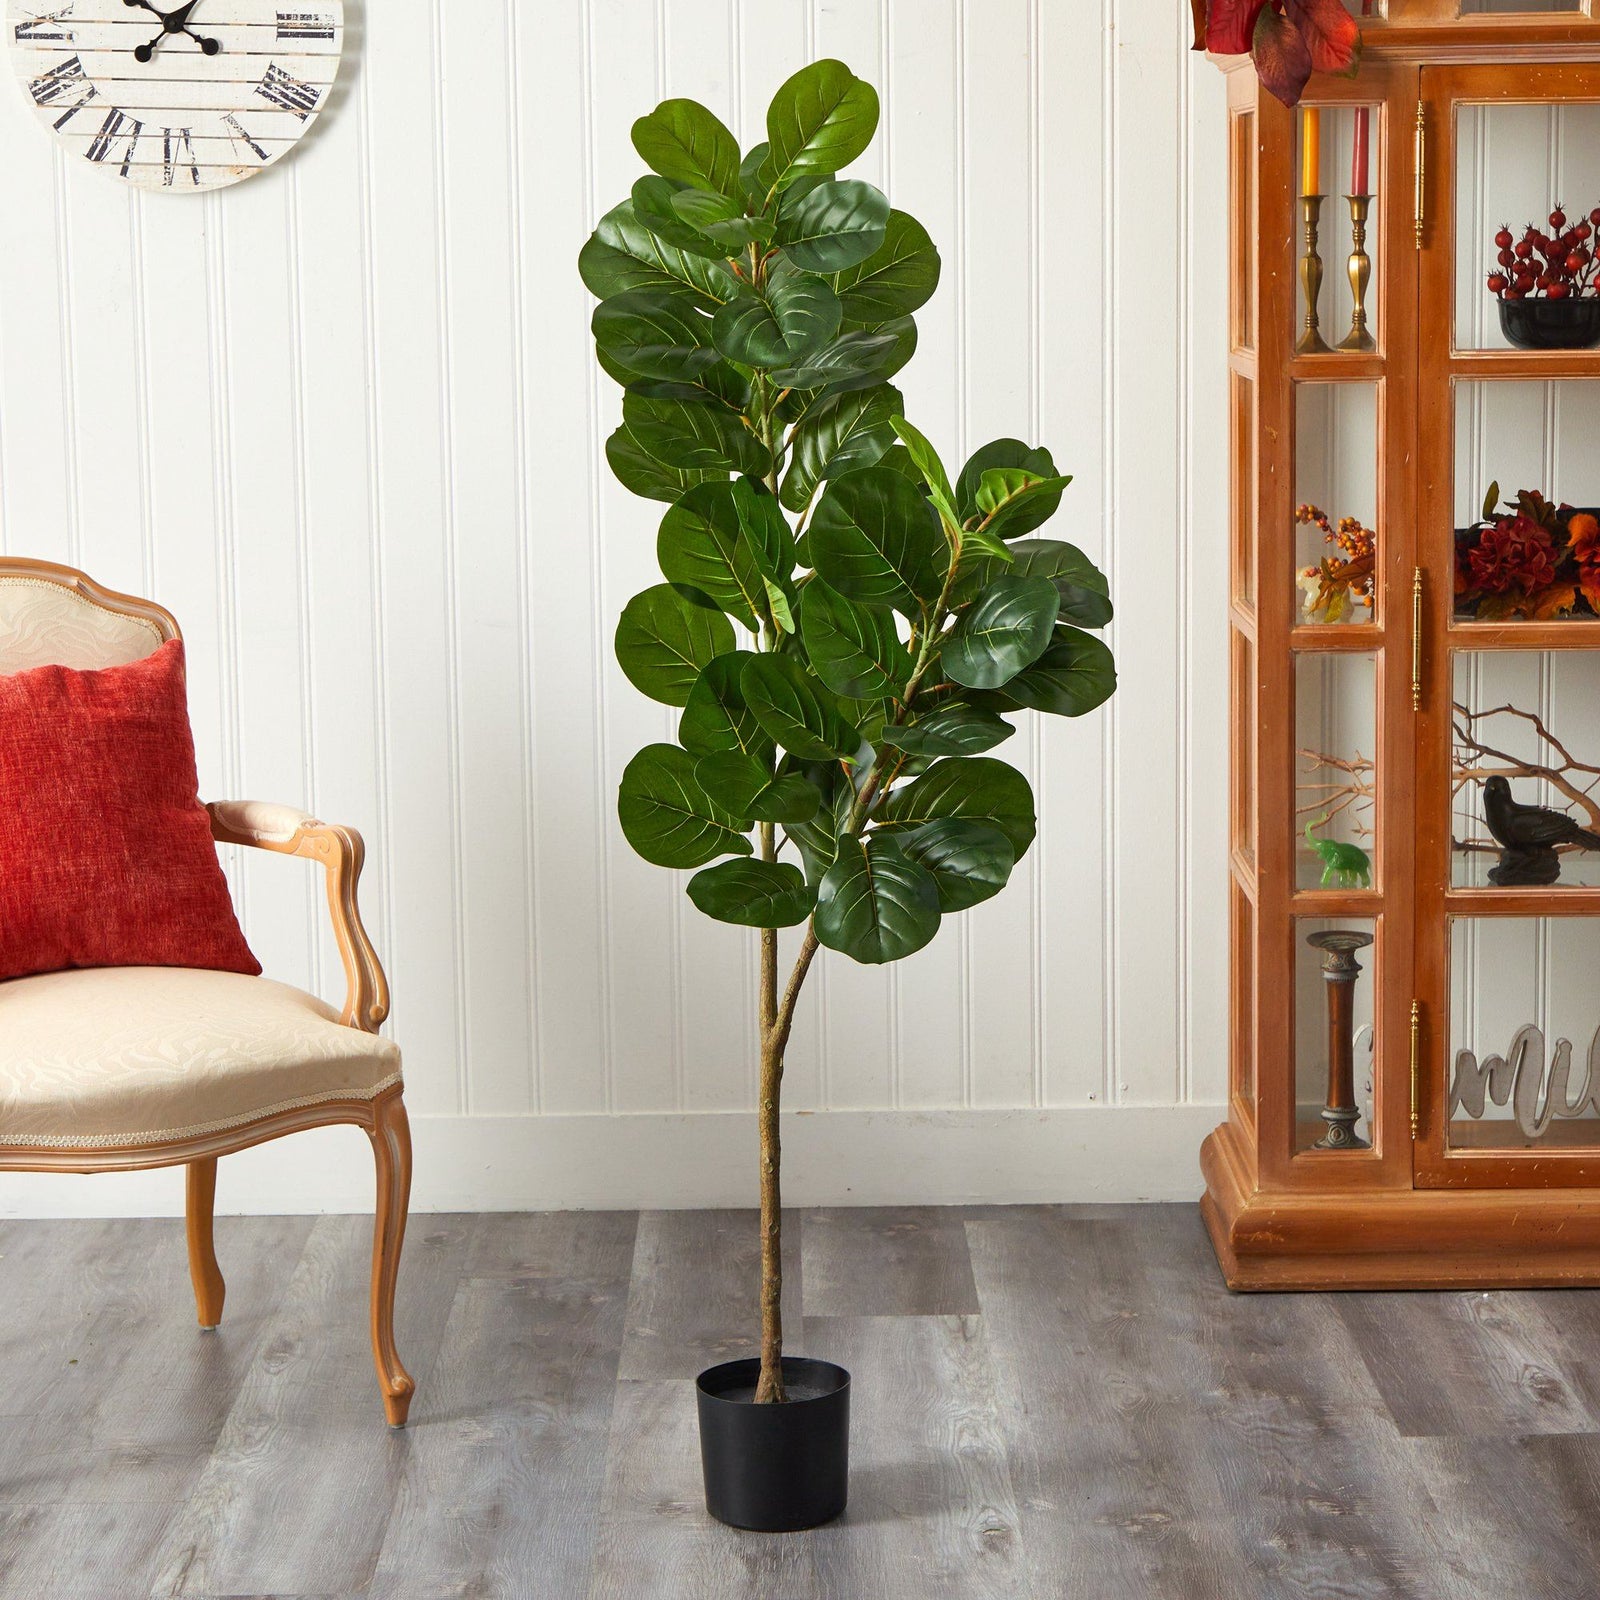 5.5’ Fiddle Leaf Fig Artificial Tree | Nearly Natural